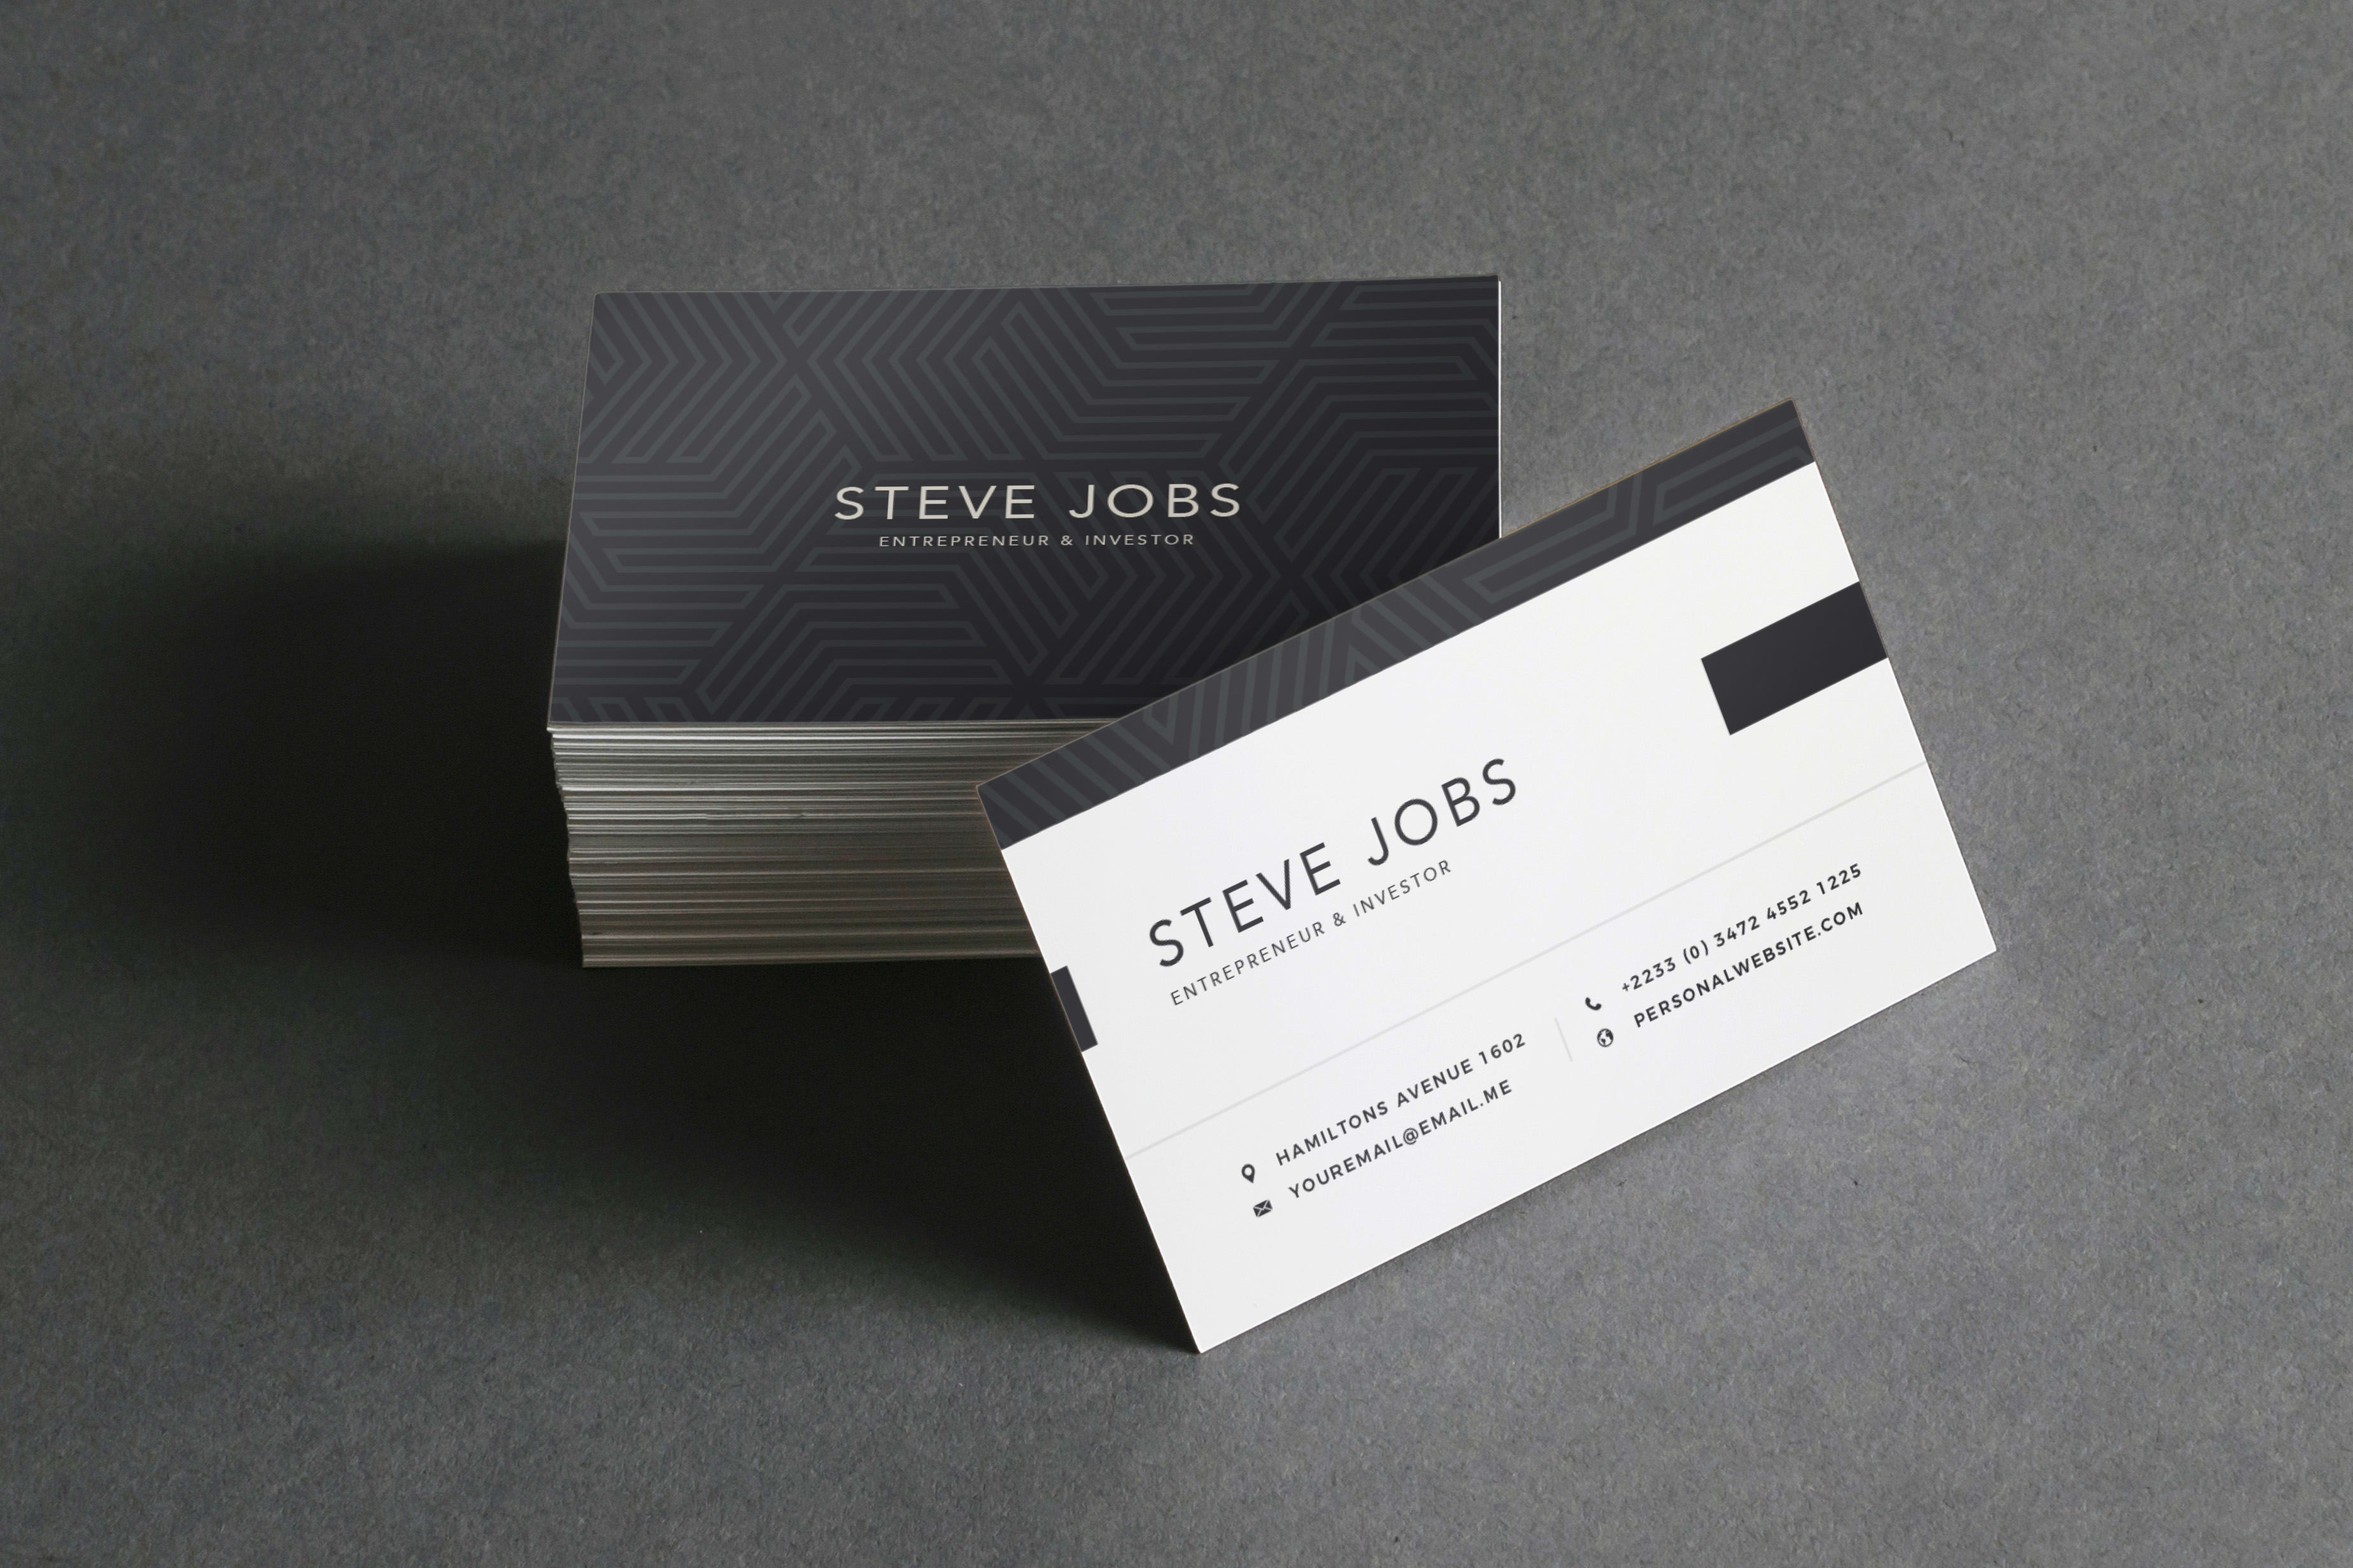 10 Best Business Card Designs That Reflect Your Personality » CashKaro Blog